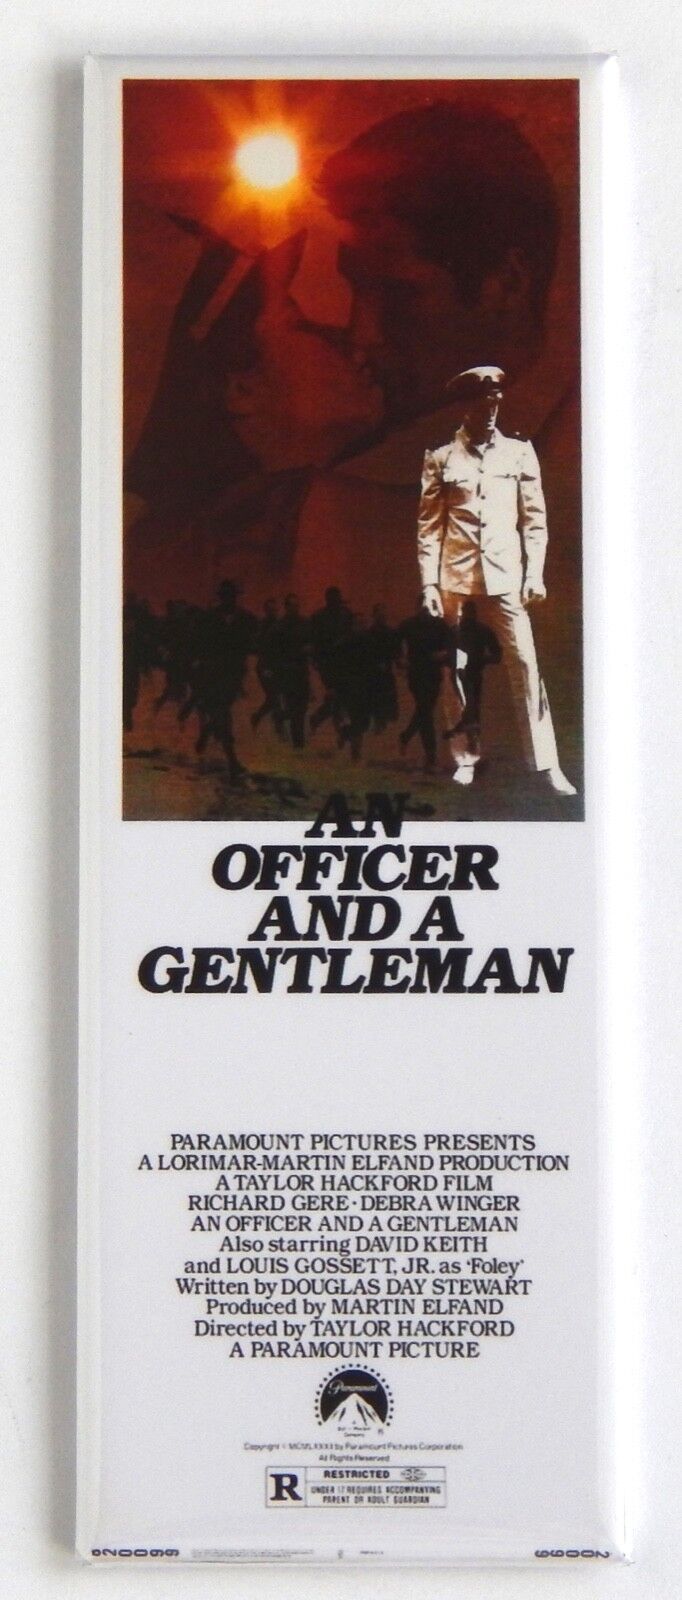 An Officer and a Gentleman FRIDGE MAGNET (1.5 x 4.5 inches) insert movie poster